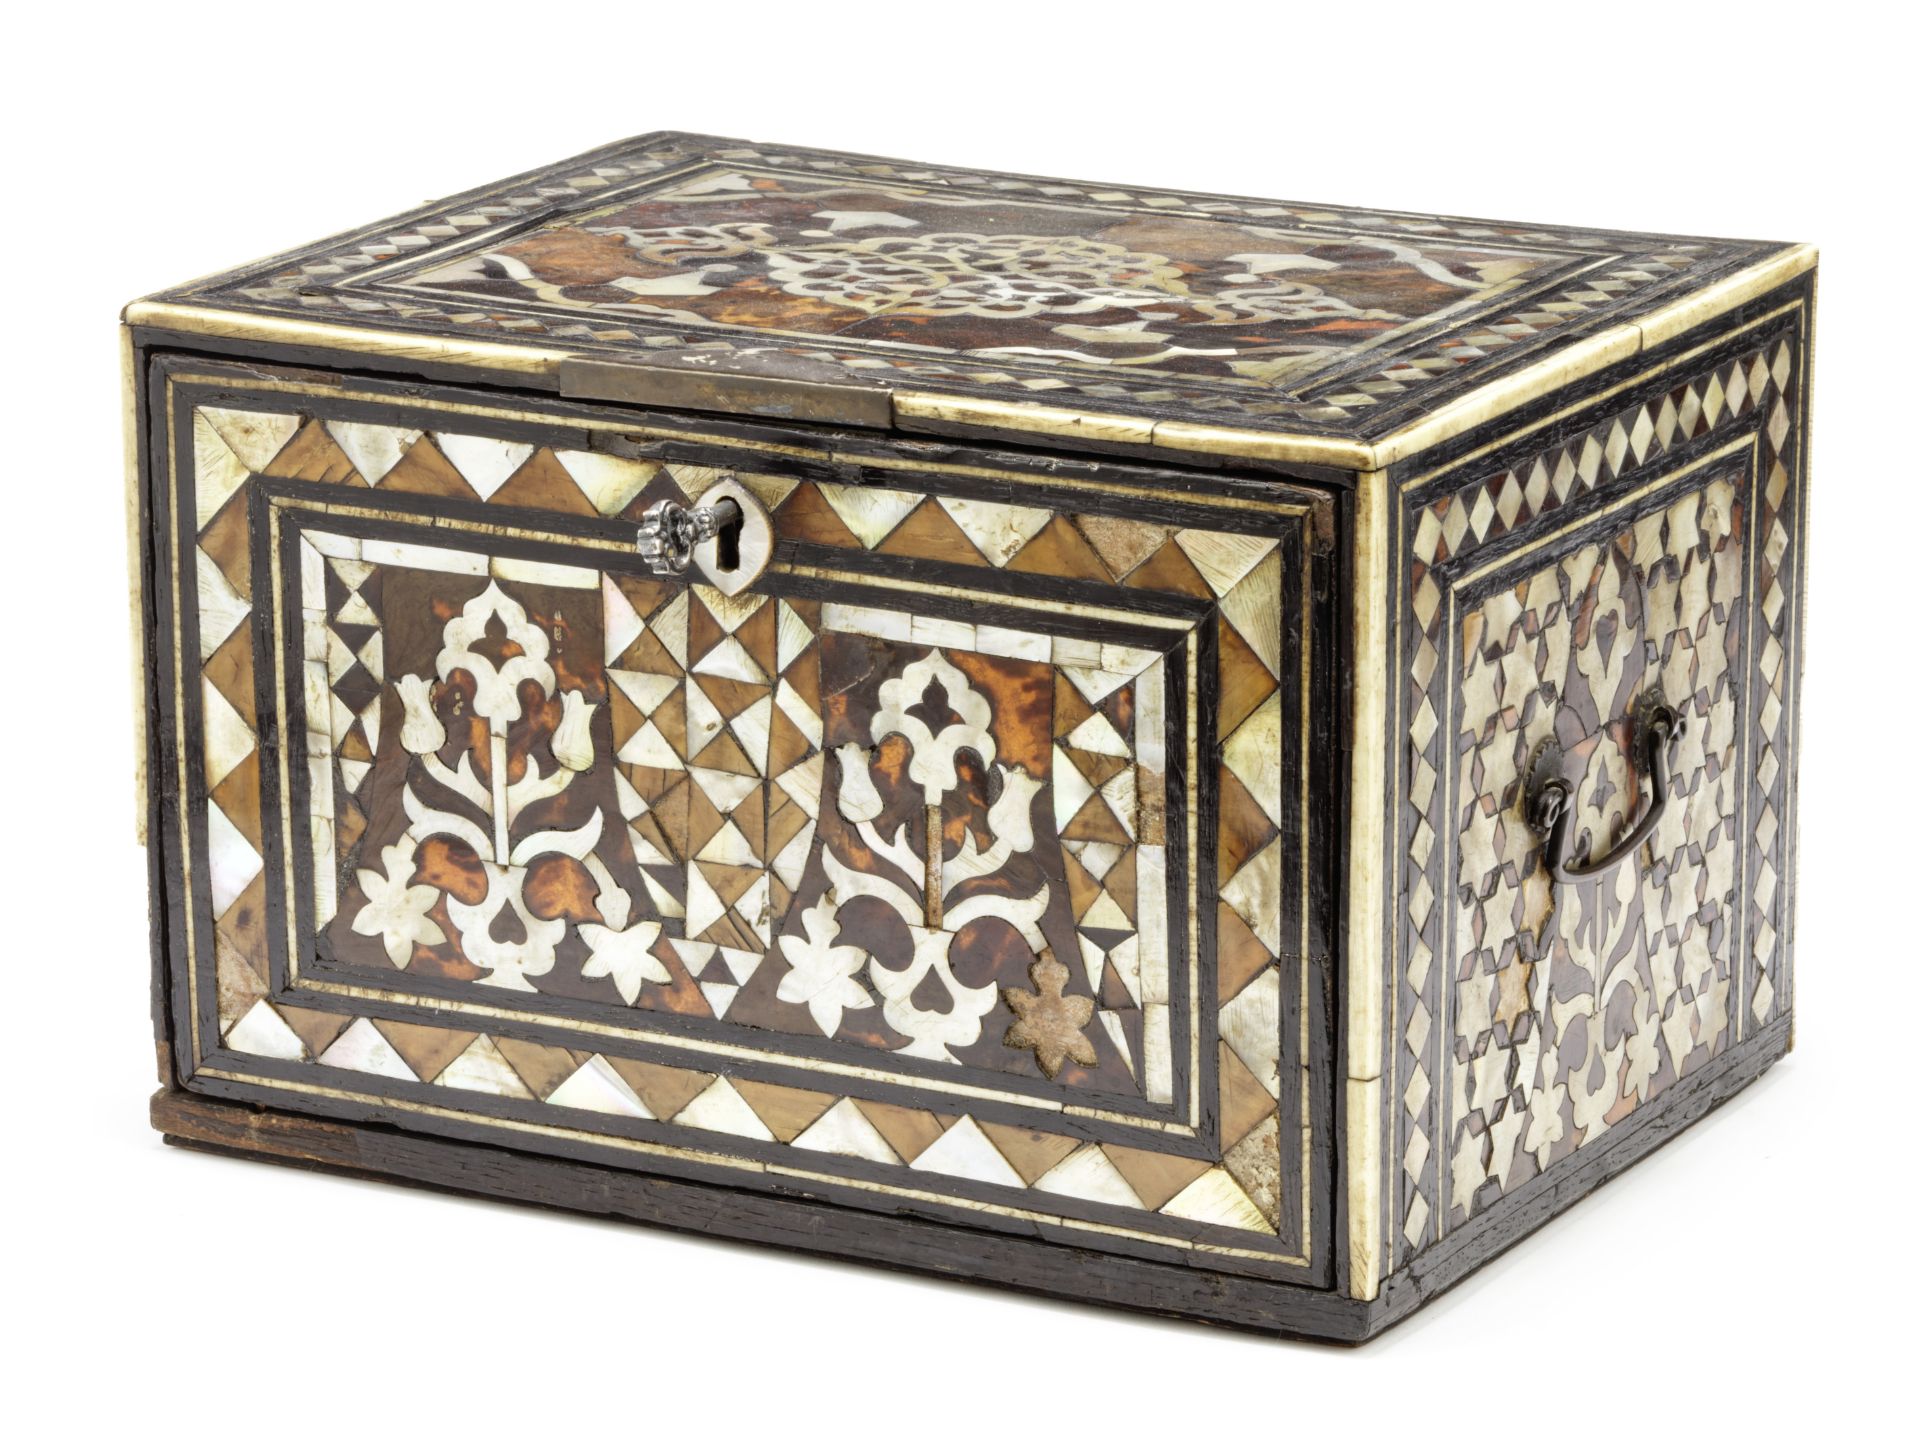 An Ottoman tortoiseshell and mother-of-pearl inlaid cabinet Turkey, 18th century